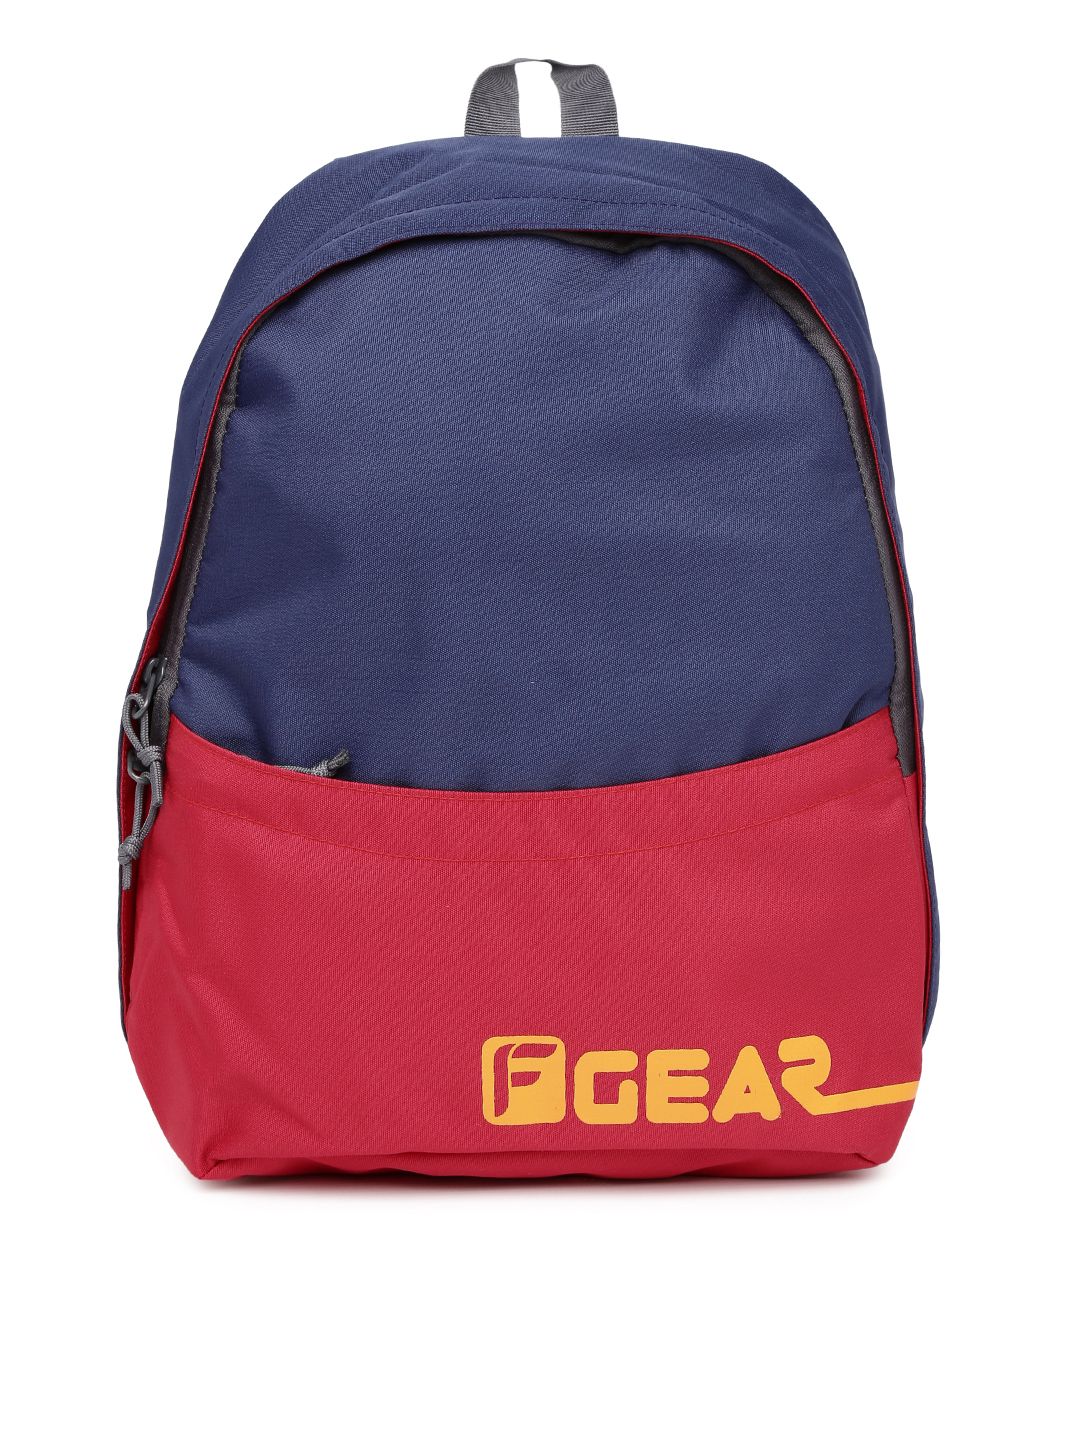 F Gear Unisex Navy & Red Saviour Backpack Price in India